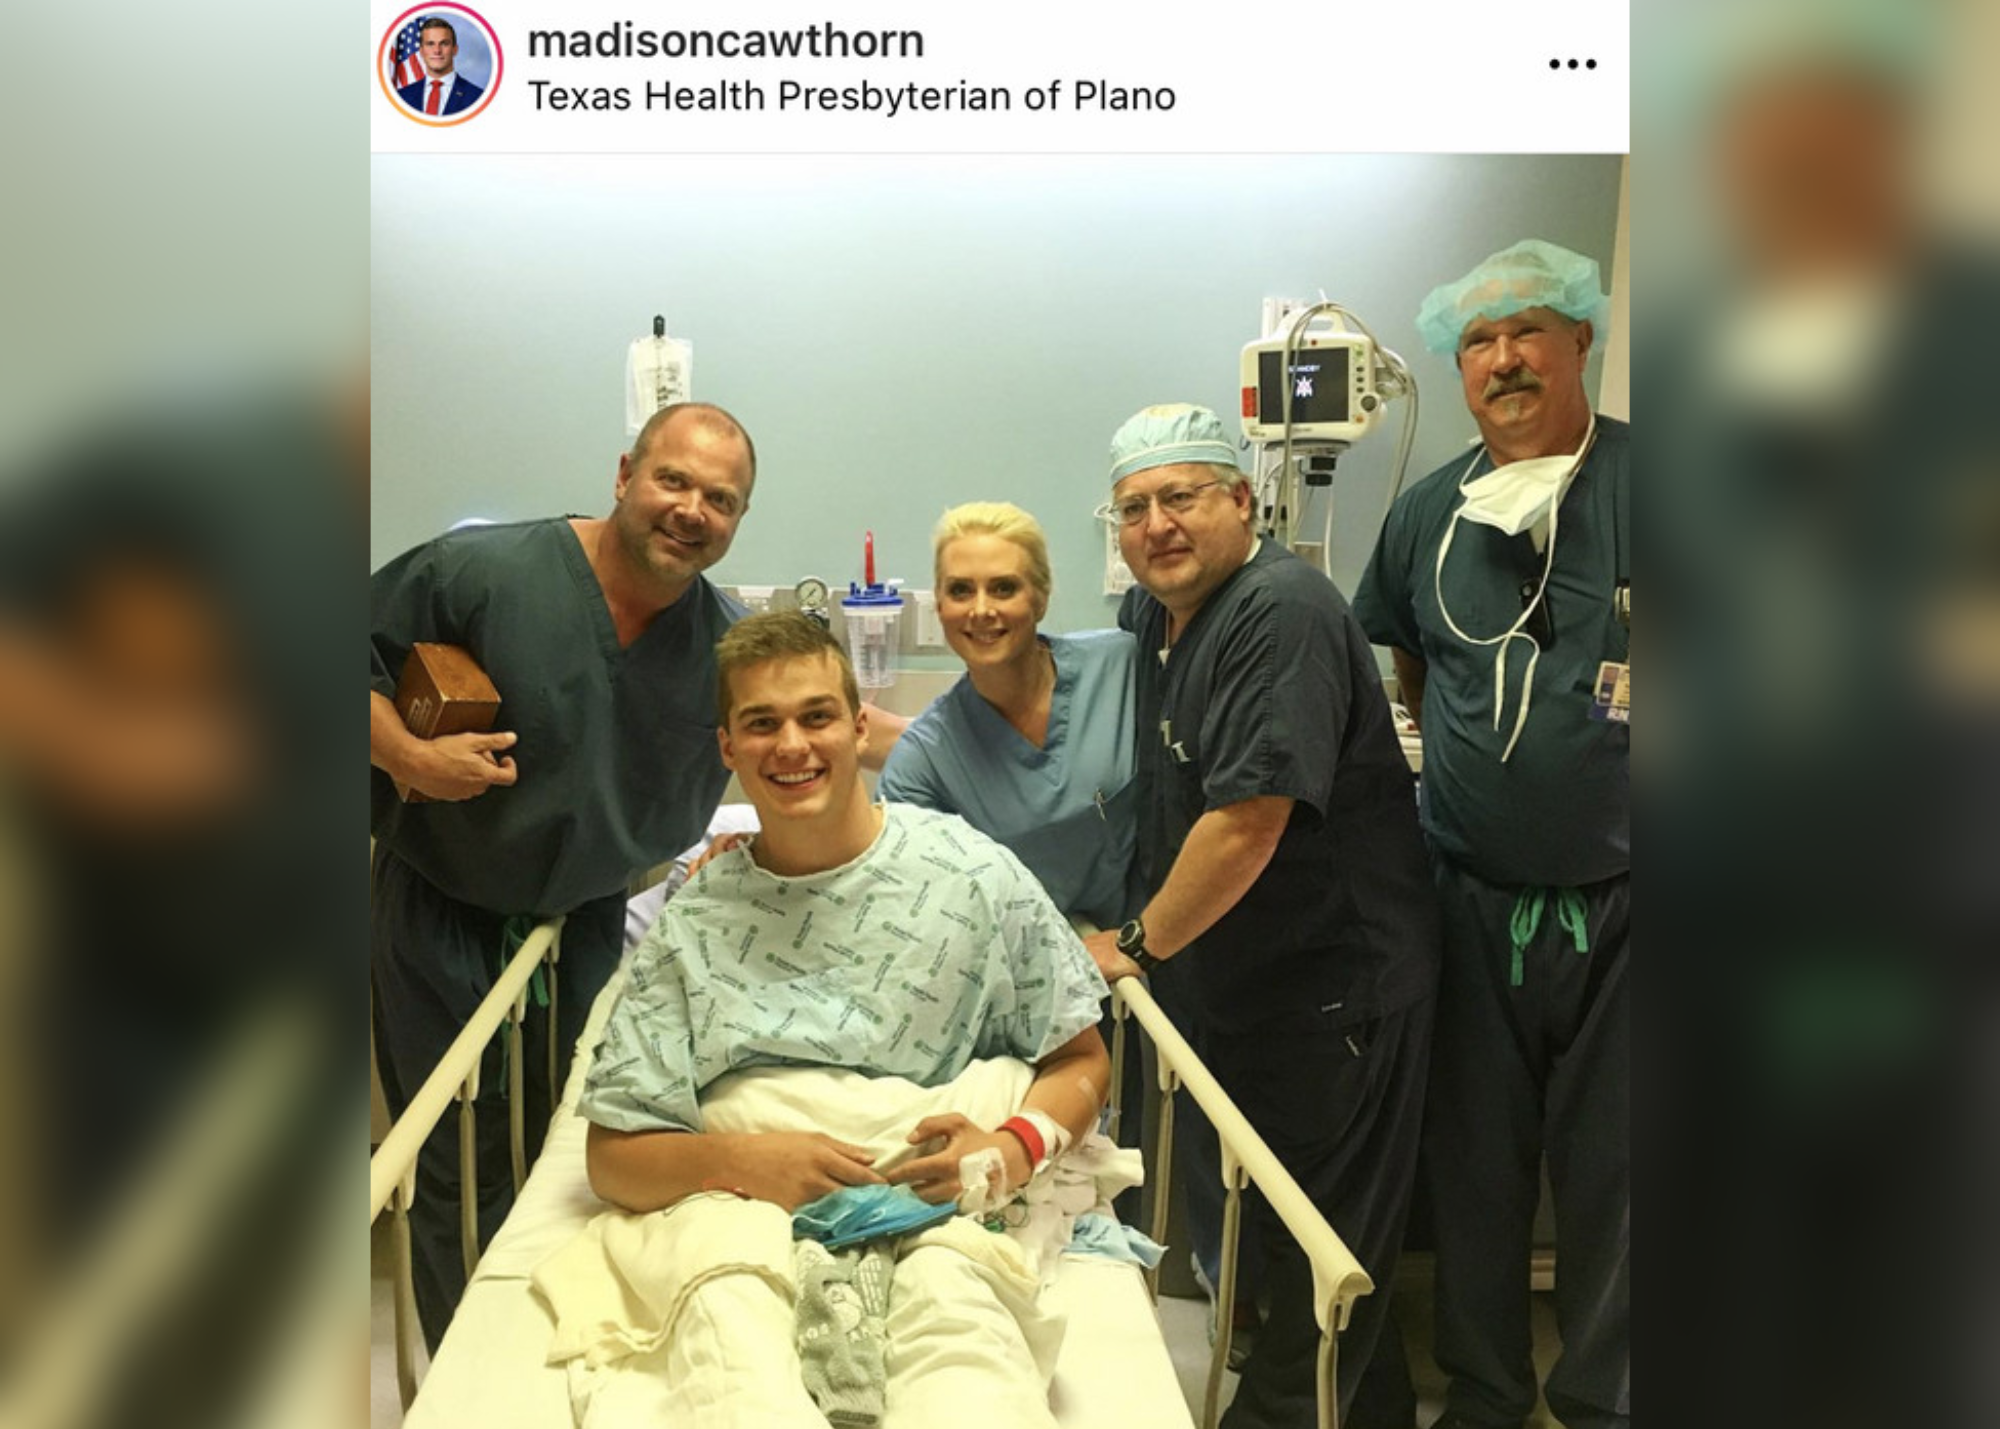 On July 19, 2016, Madison Cawthorn shared a photo of him in the hospital with his medical staff